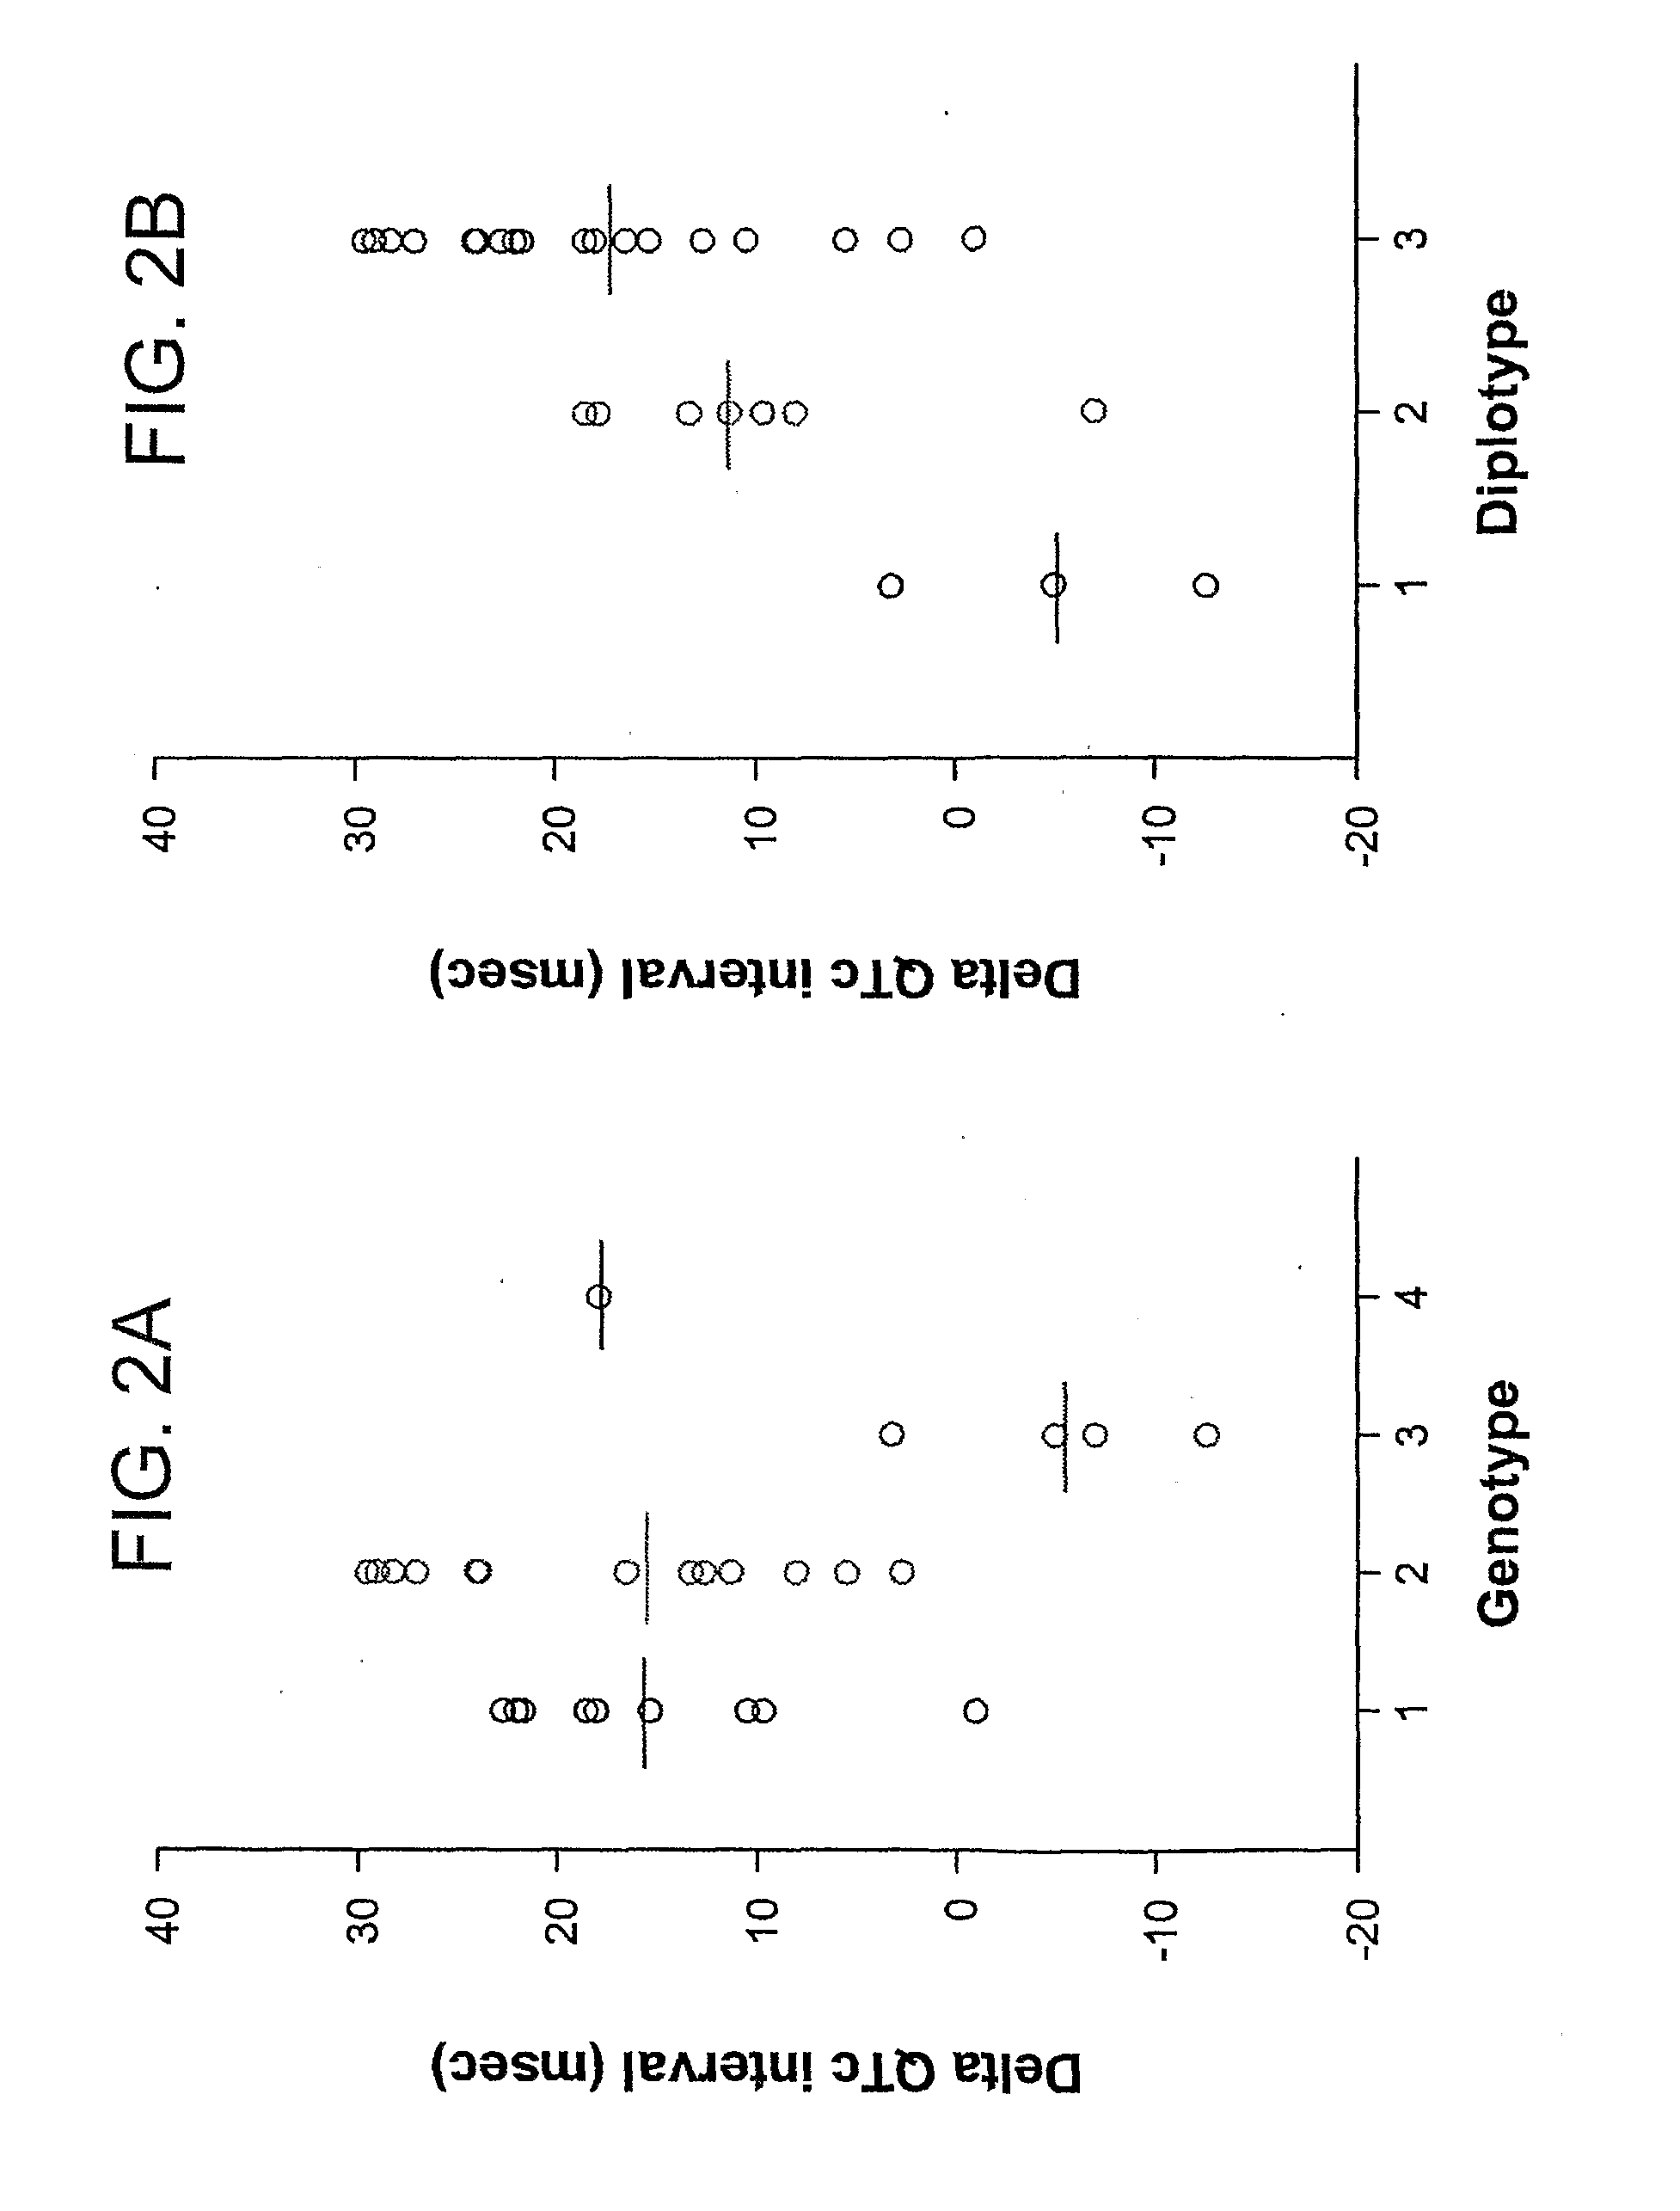 Materials and methods for abcb1 polymorphic variant screening, diagnosis, and treatment